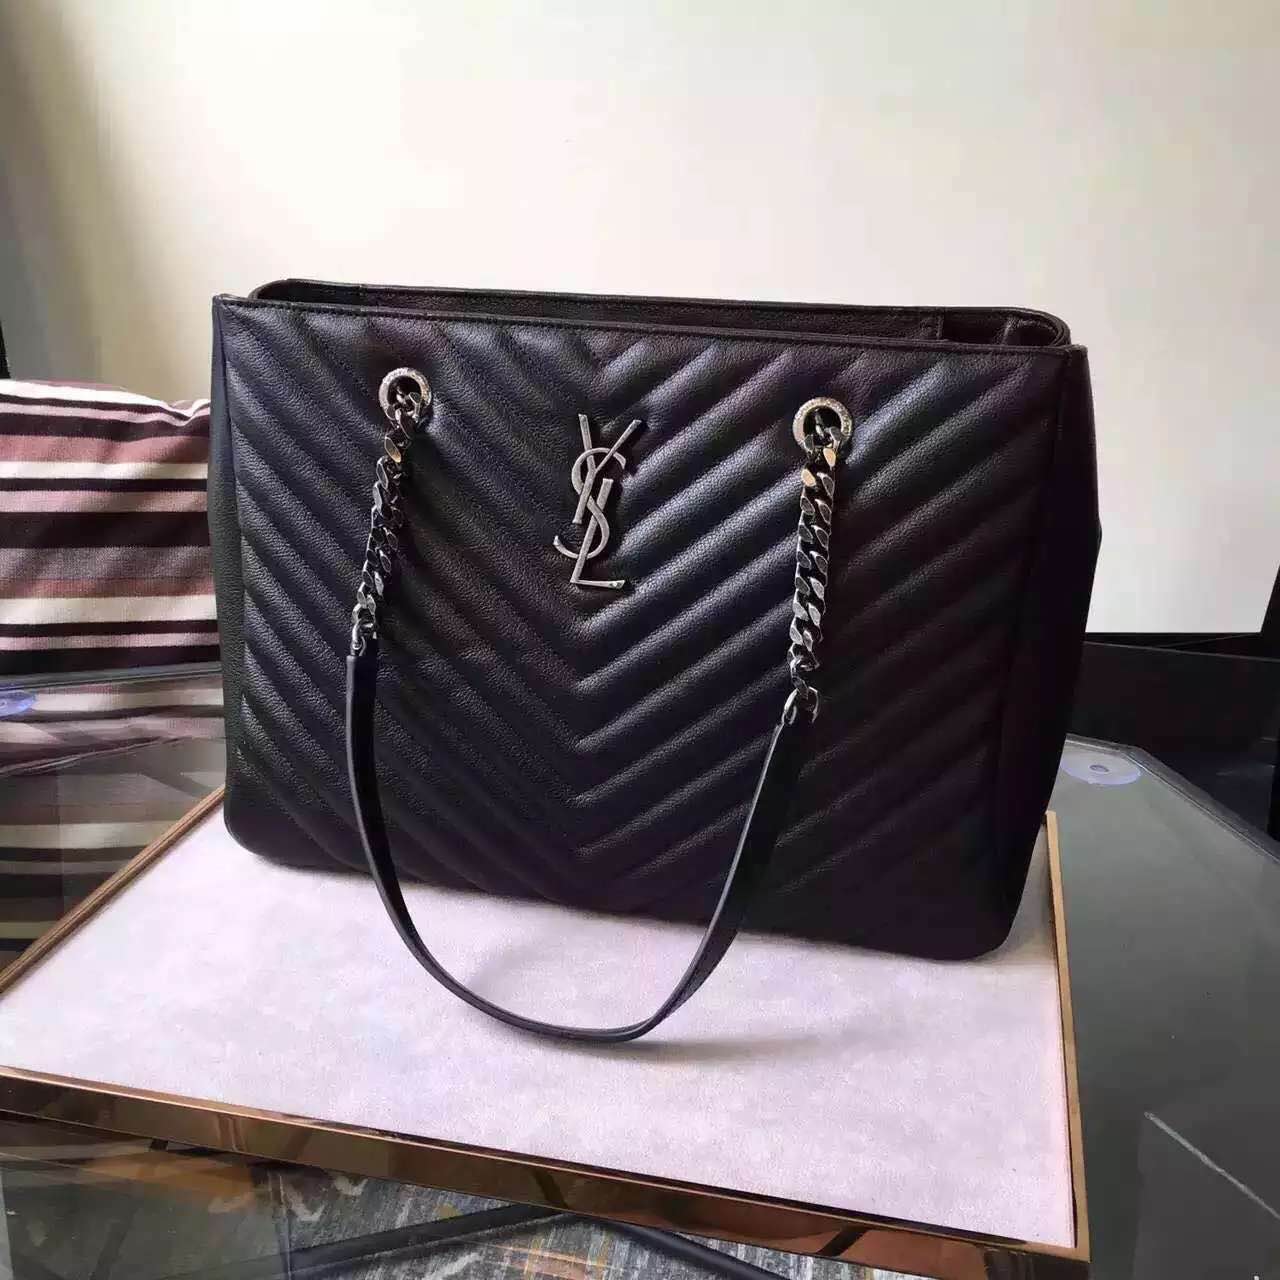 Malaysia outlet bag ysl Buy Sling